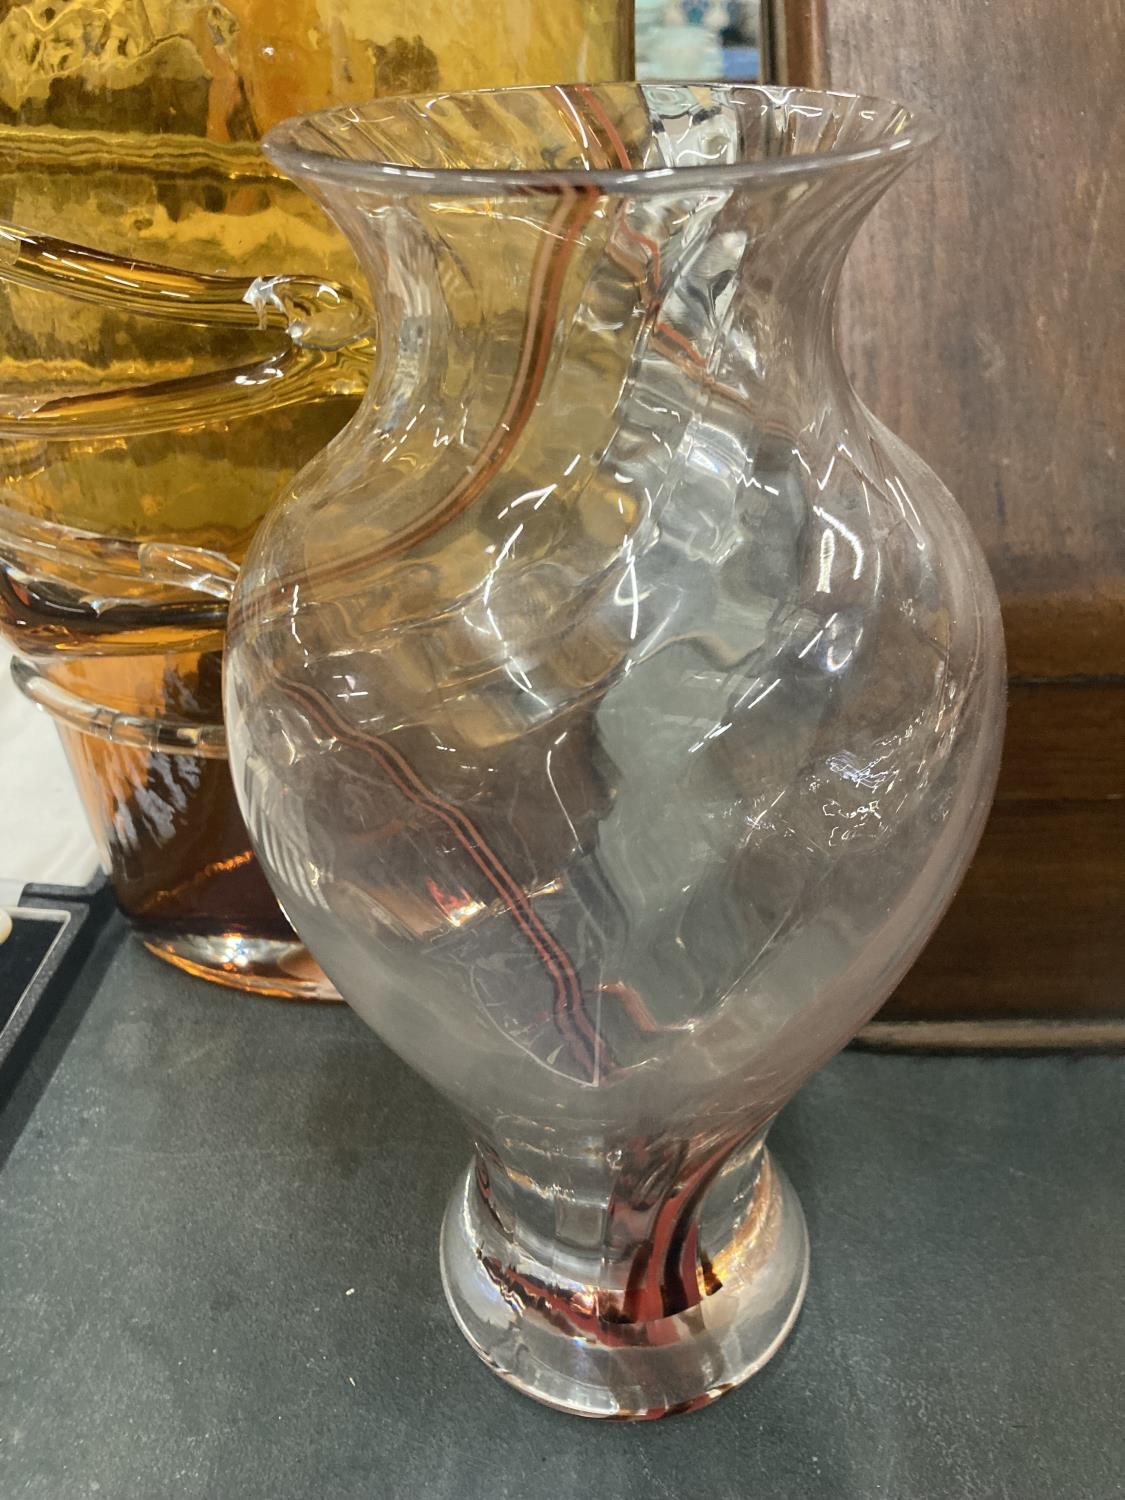 TWO STUDIO ART VASES TO INCLUDE A LARGE AMBER COLOURED WITH GLASS SWIRLS - Image 2 of 3